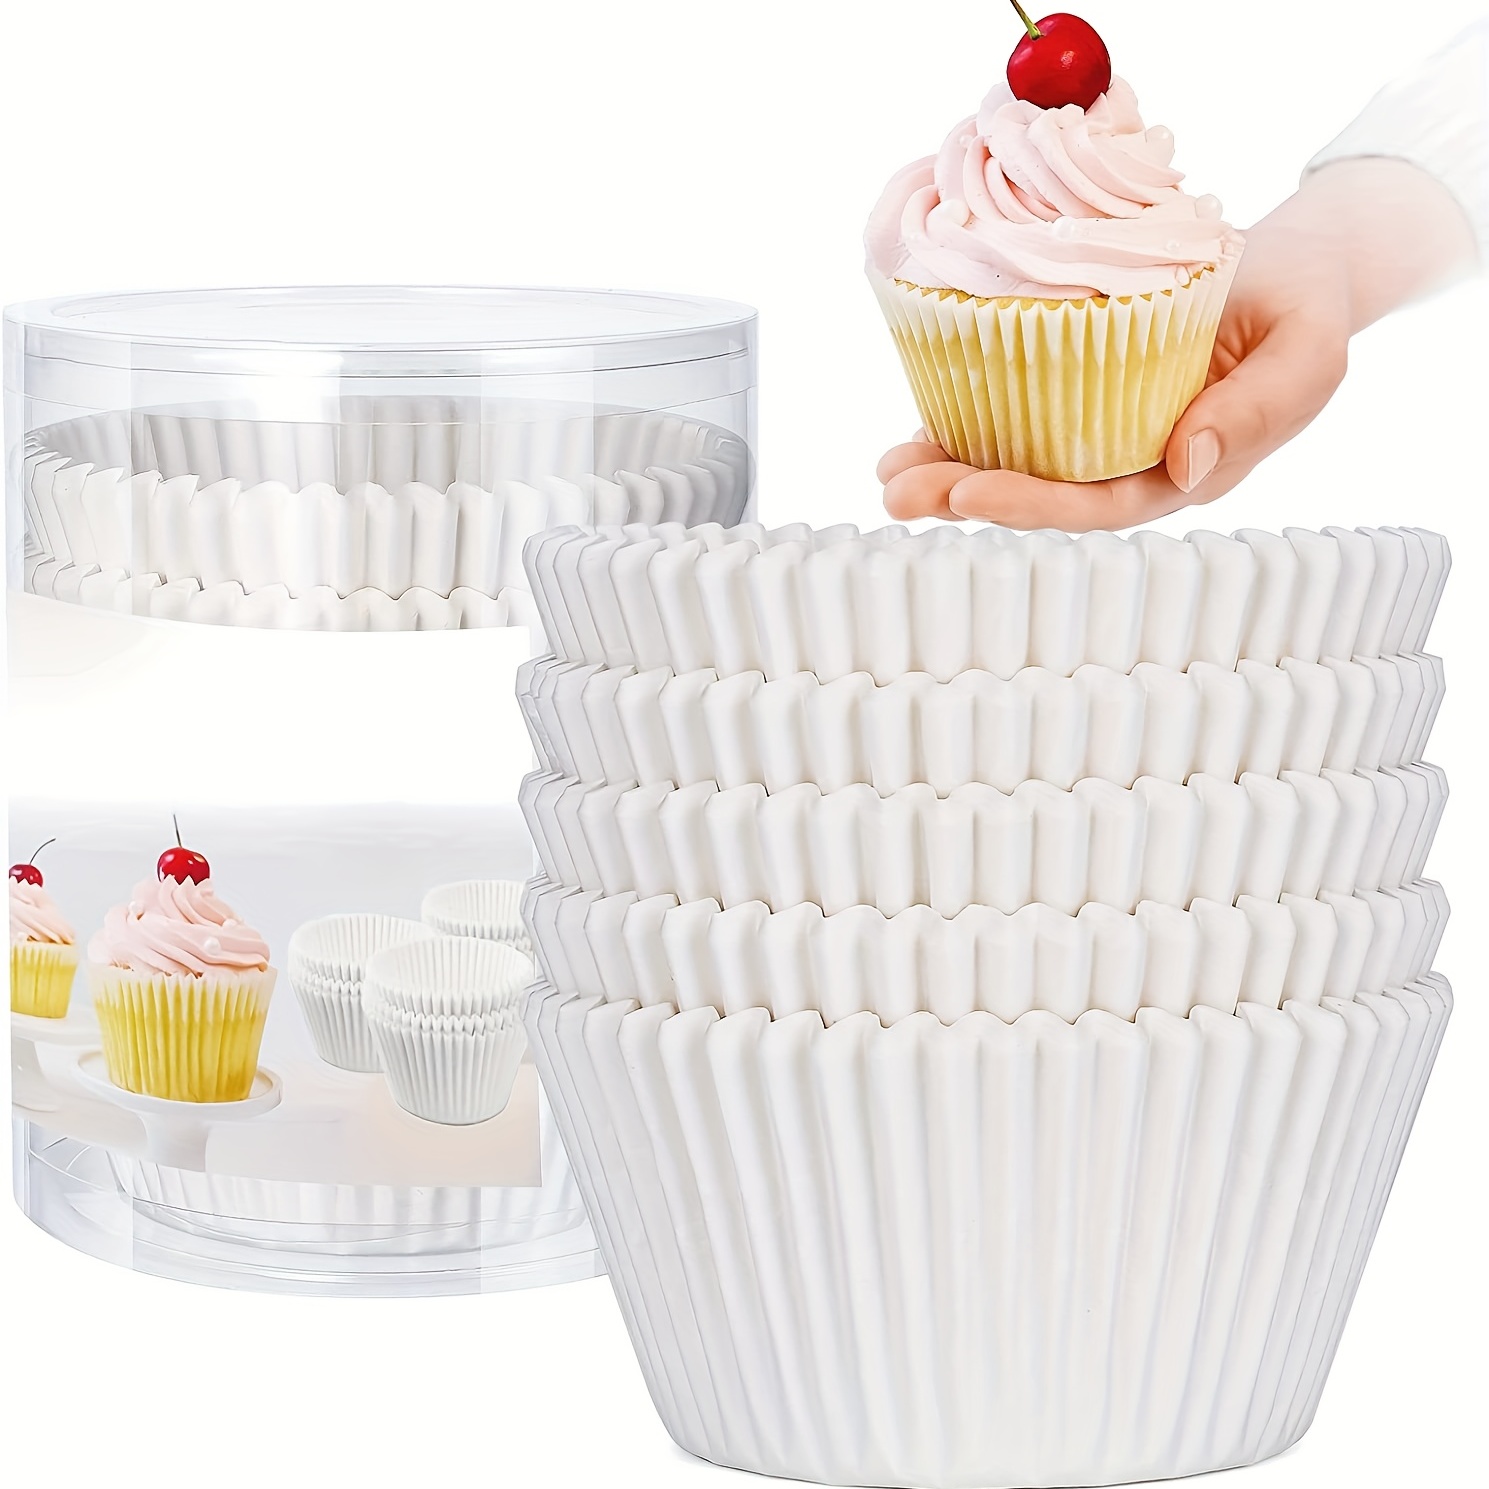 100pcs/box Random Style Baking Cookie Base For Cupcake, Greaseproof Paper  Cupcake Liners, Random Style